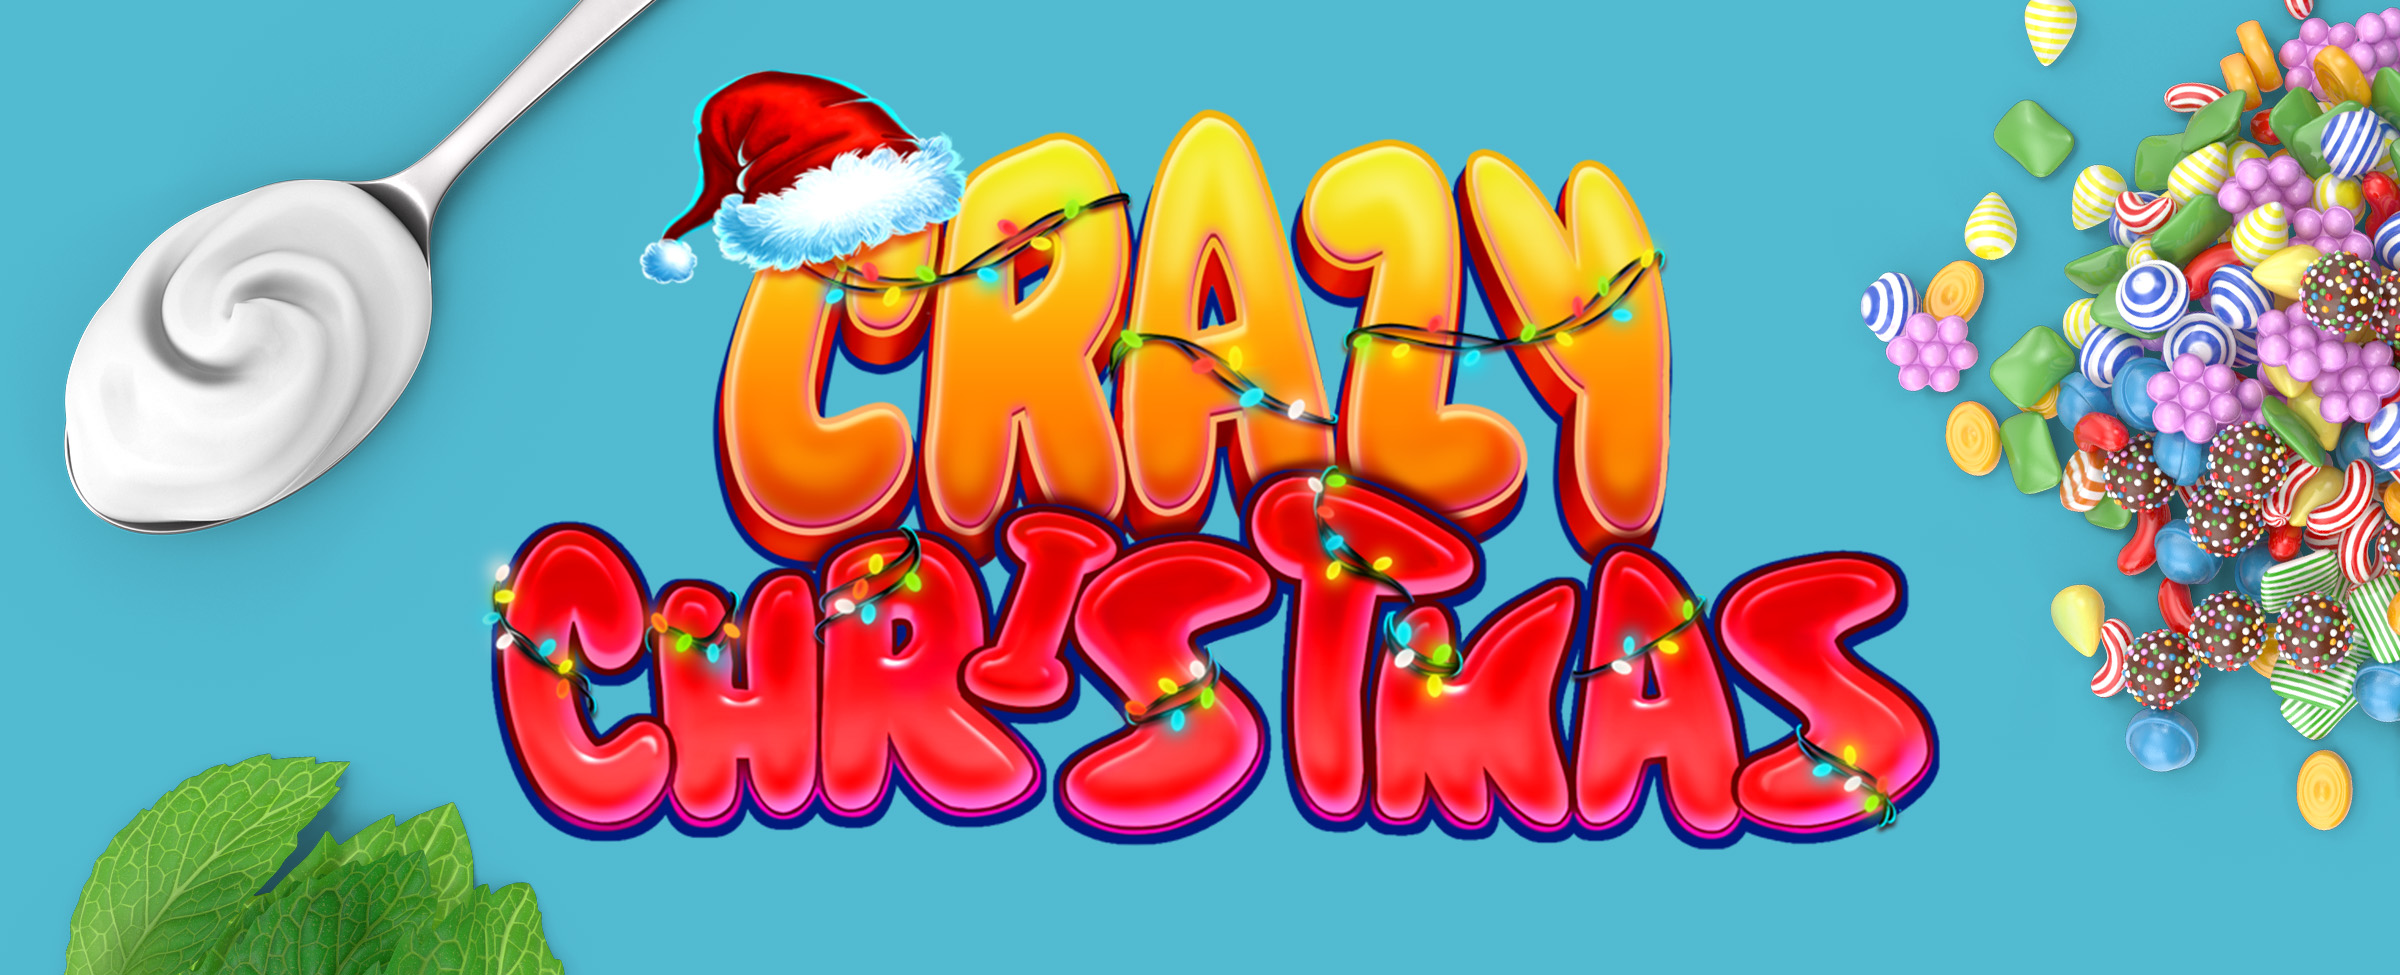 A blue table surface with a silver spoon and yogurt, an assortment of candies, mint leaves, and the logo of the Cafe Casino slot game Crazy Christmas, showing a Santa hat above the C in Crazy.